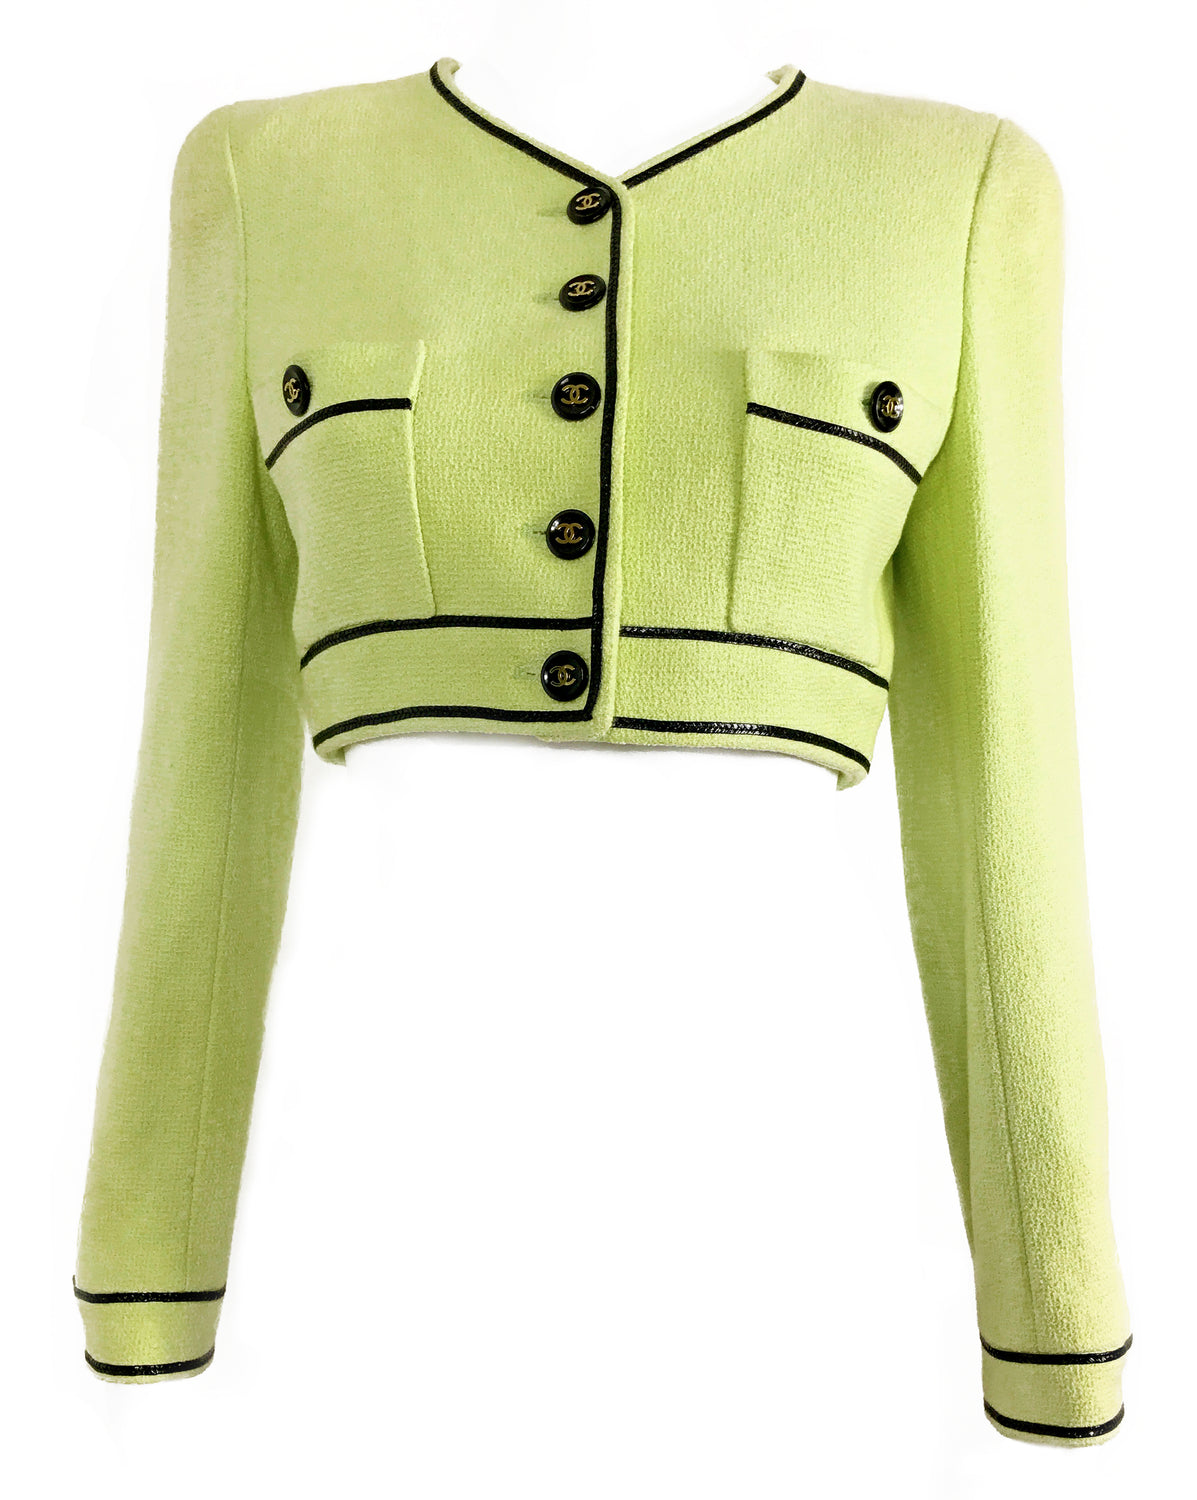 FRUIT Vintage Chanel Spring Summer 1995 Green Boucle Cropped Jacket Karl Lagerfeld Claudia Schiffer